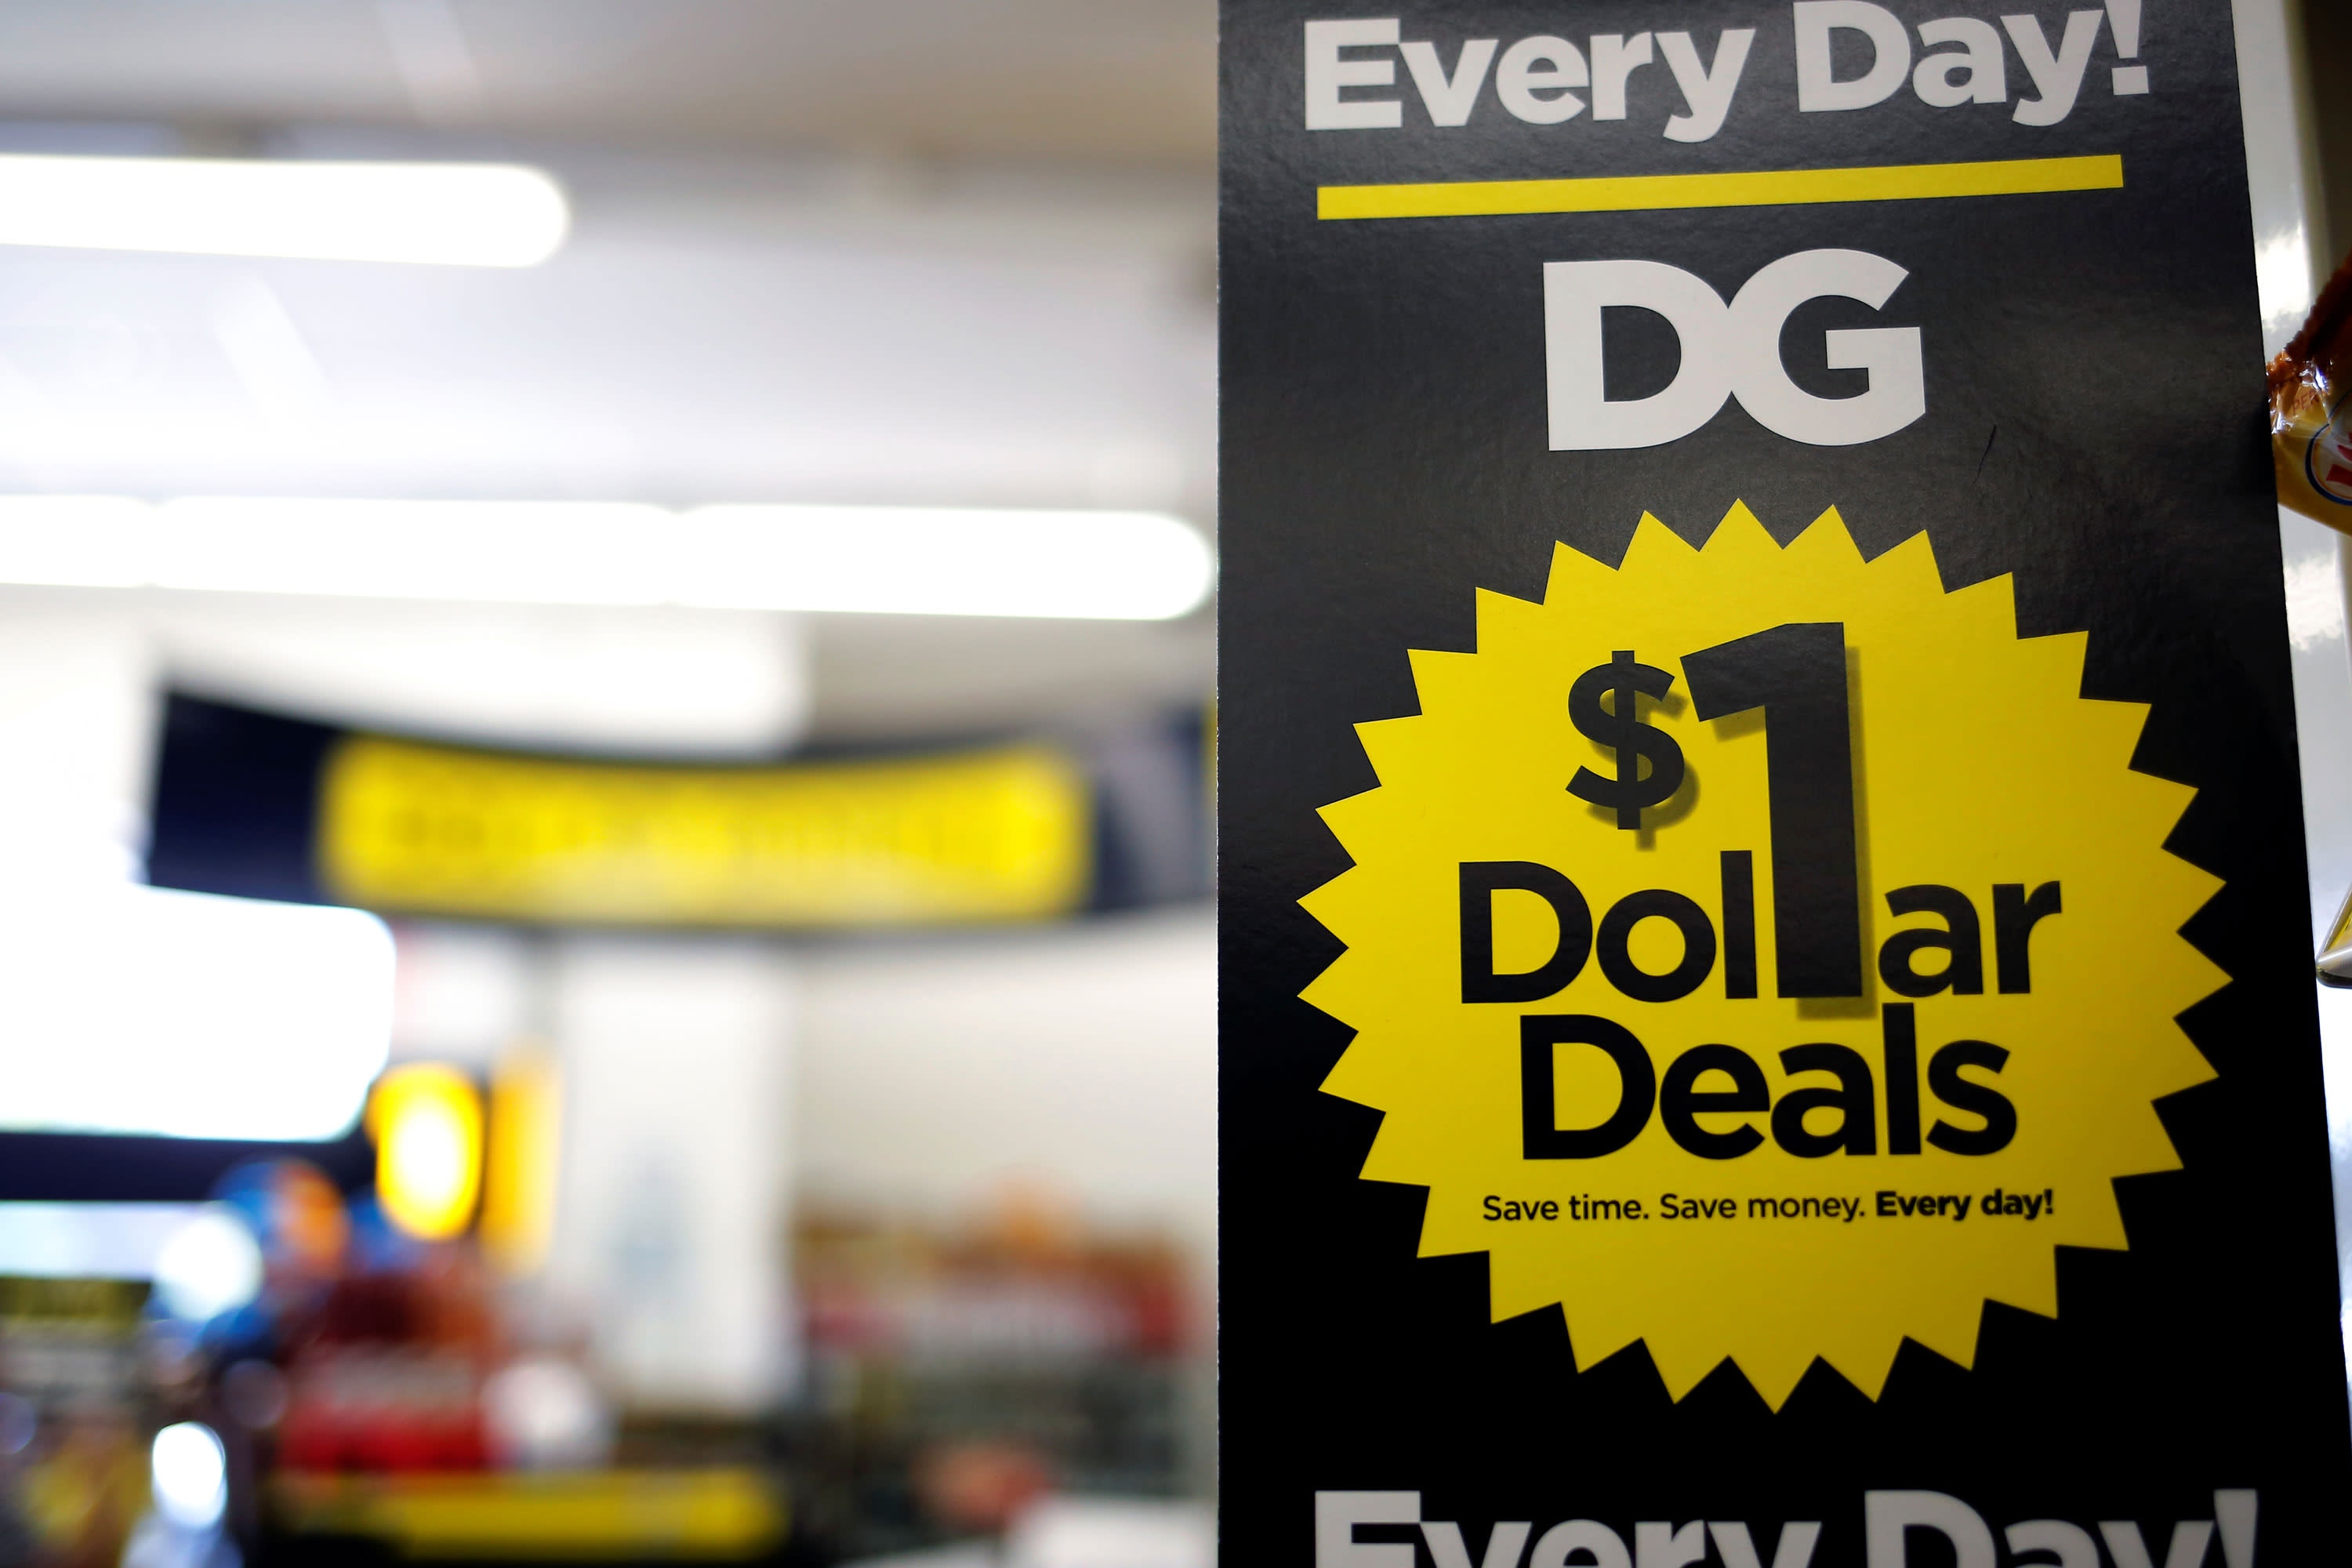 Dollar General will build bigger stores, expand the Popshelf brand